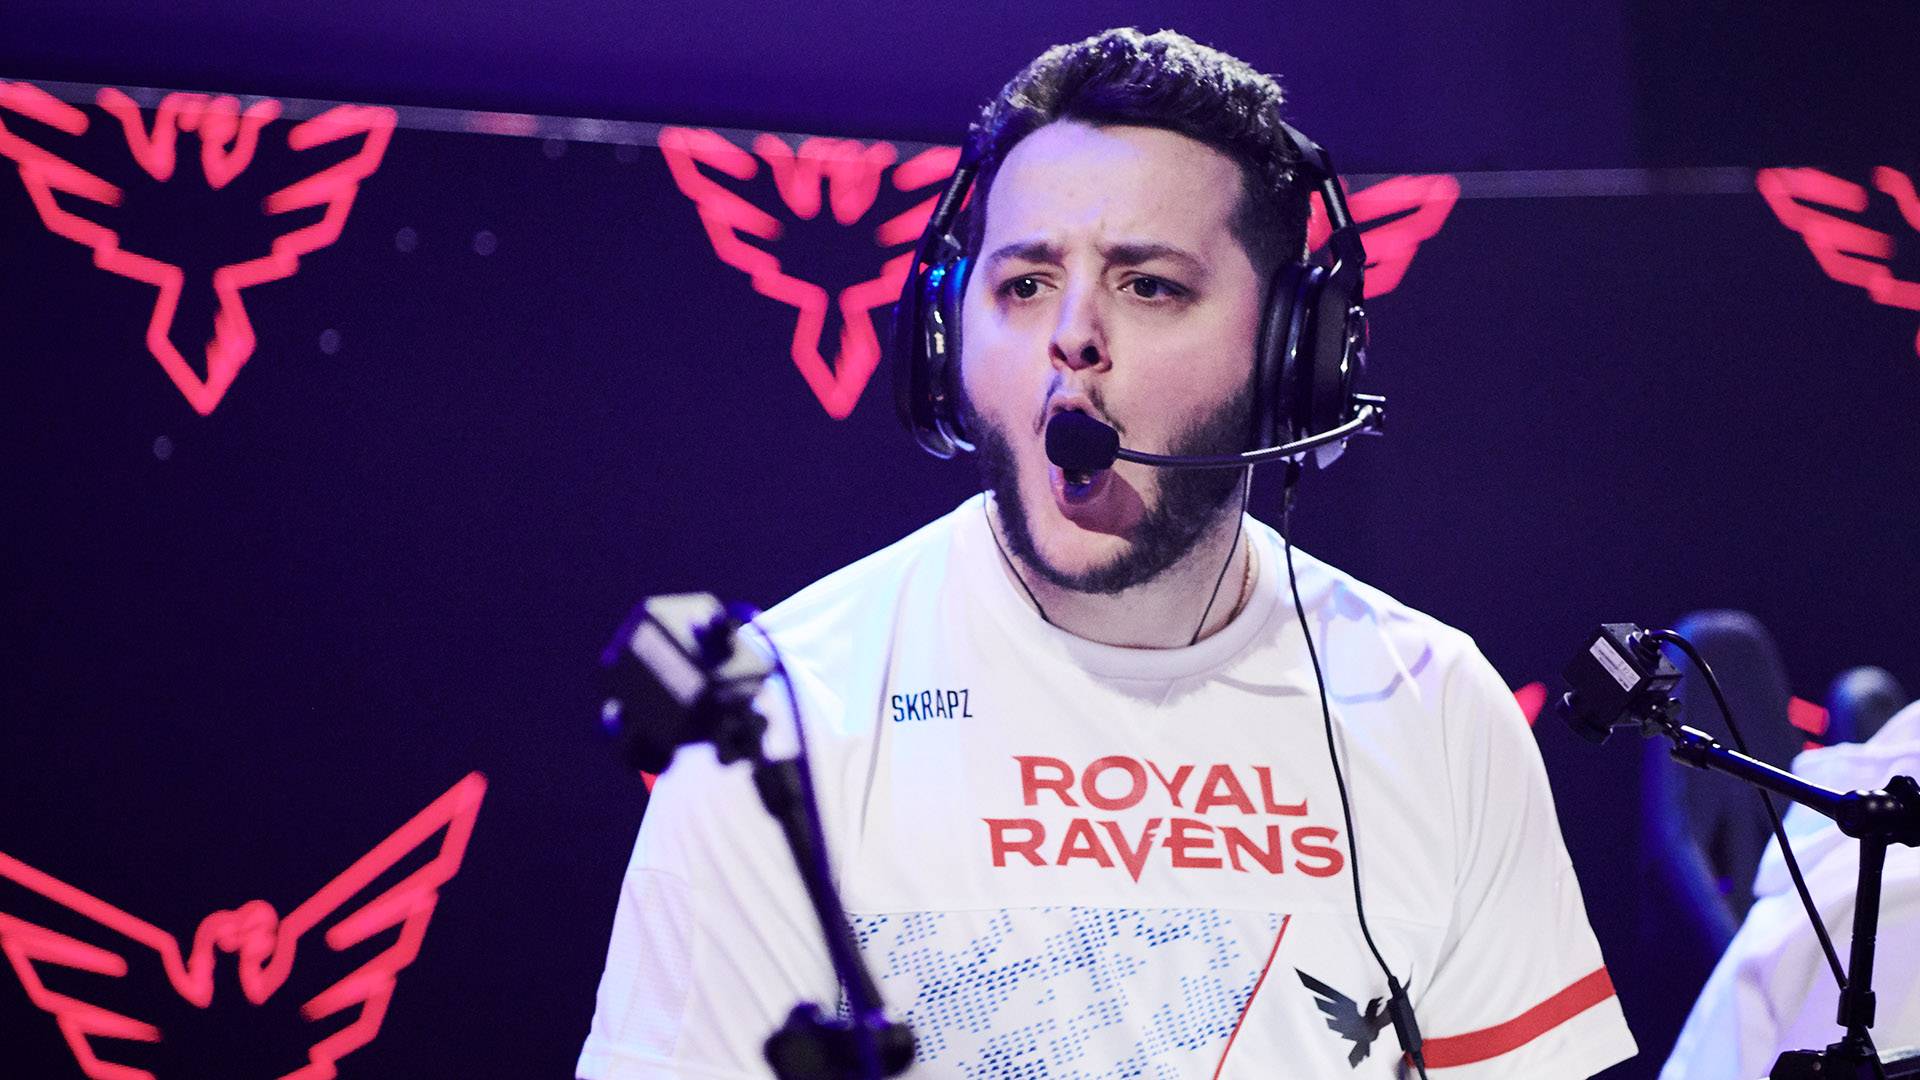 Call of Duty – Skrapz Going Back Home To London Royal Ravens